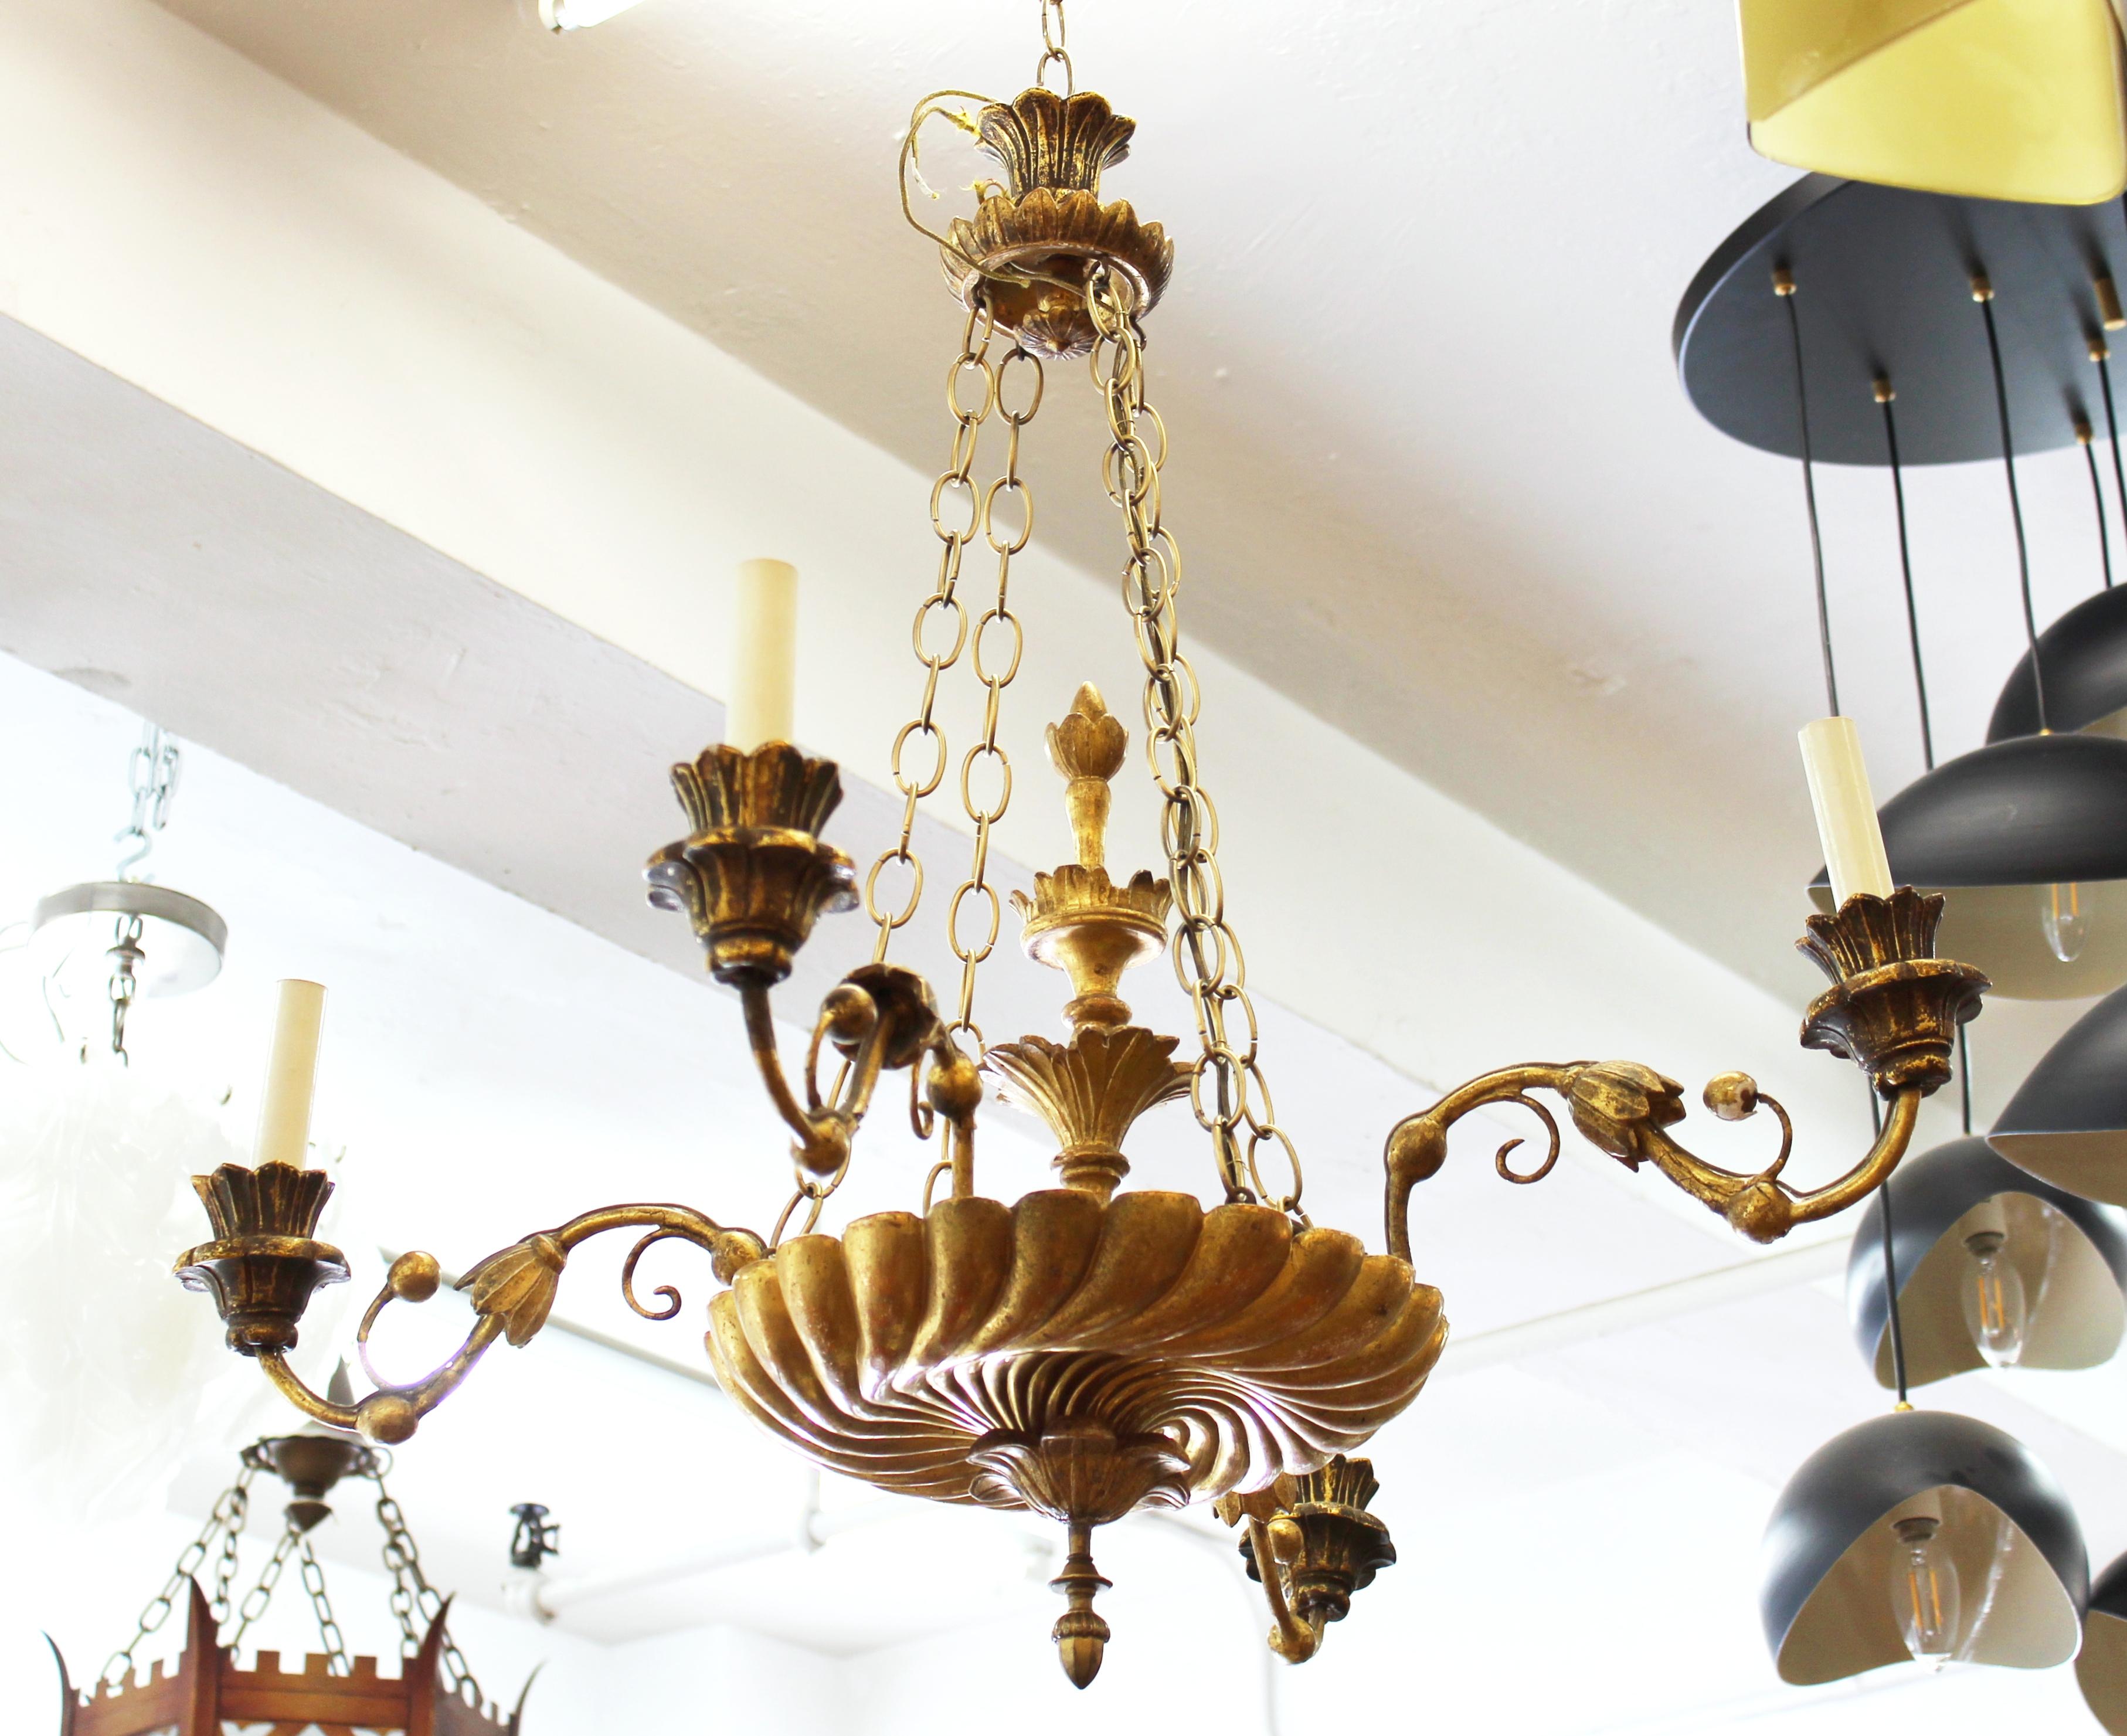 Continental Neoclassical revival style giltwood chandelier with ornamental floral elements.